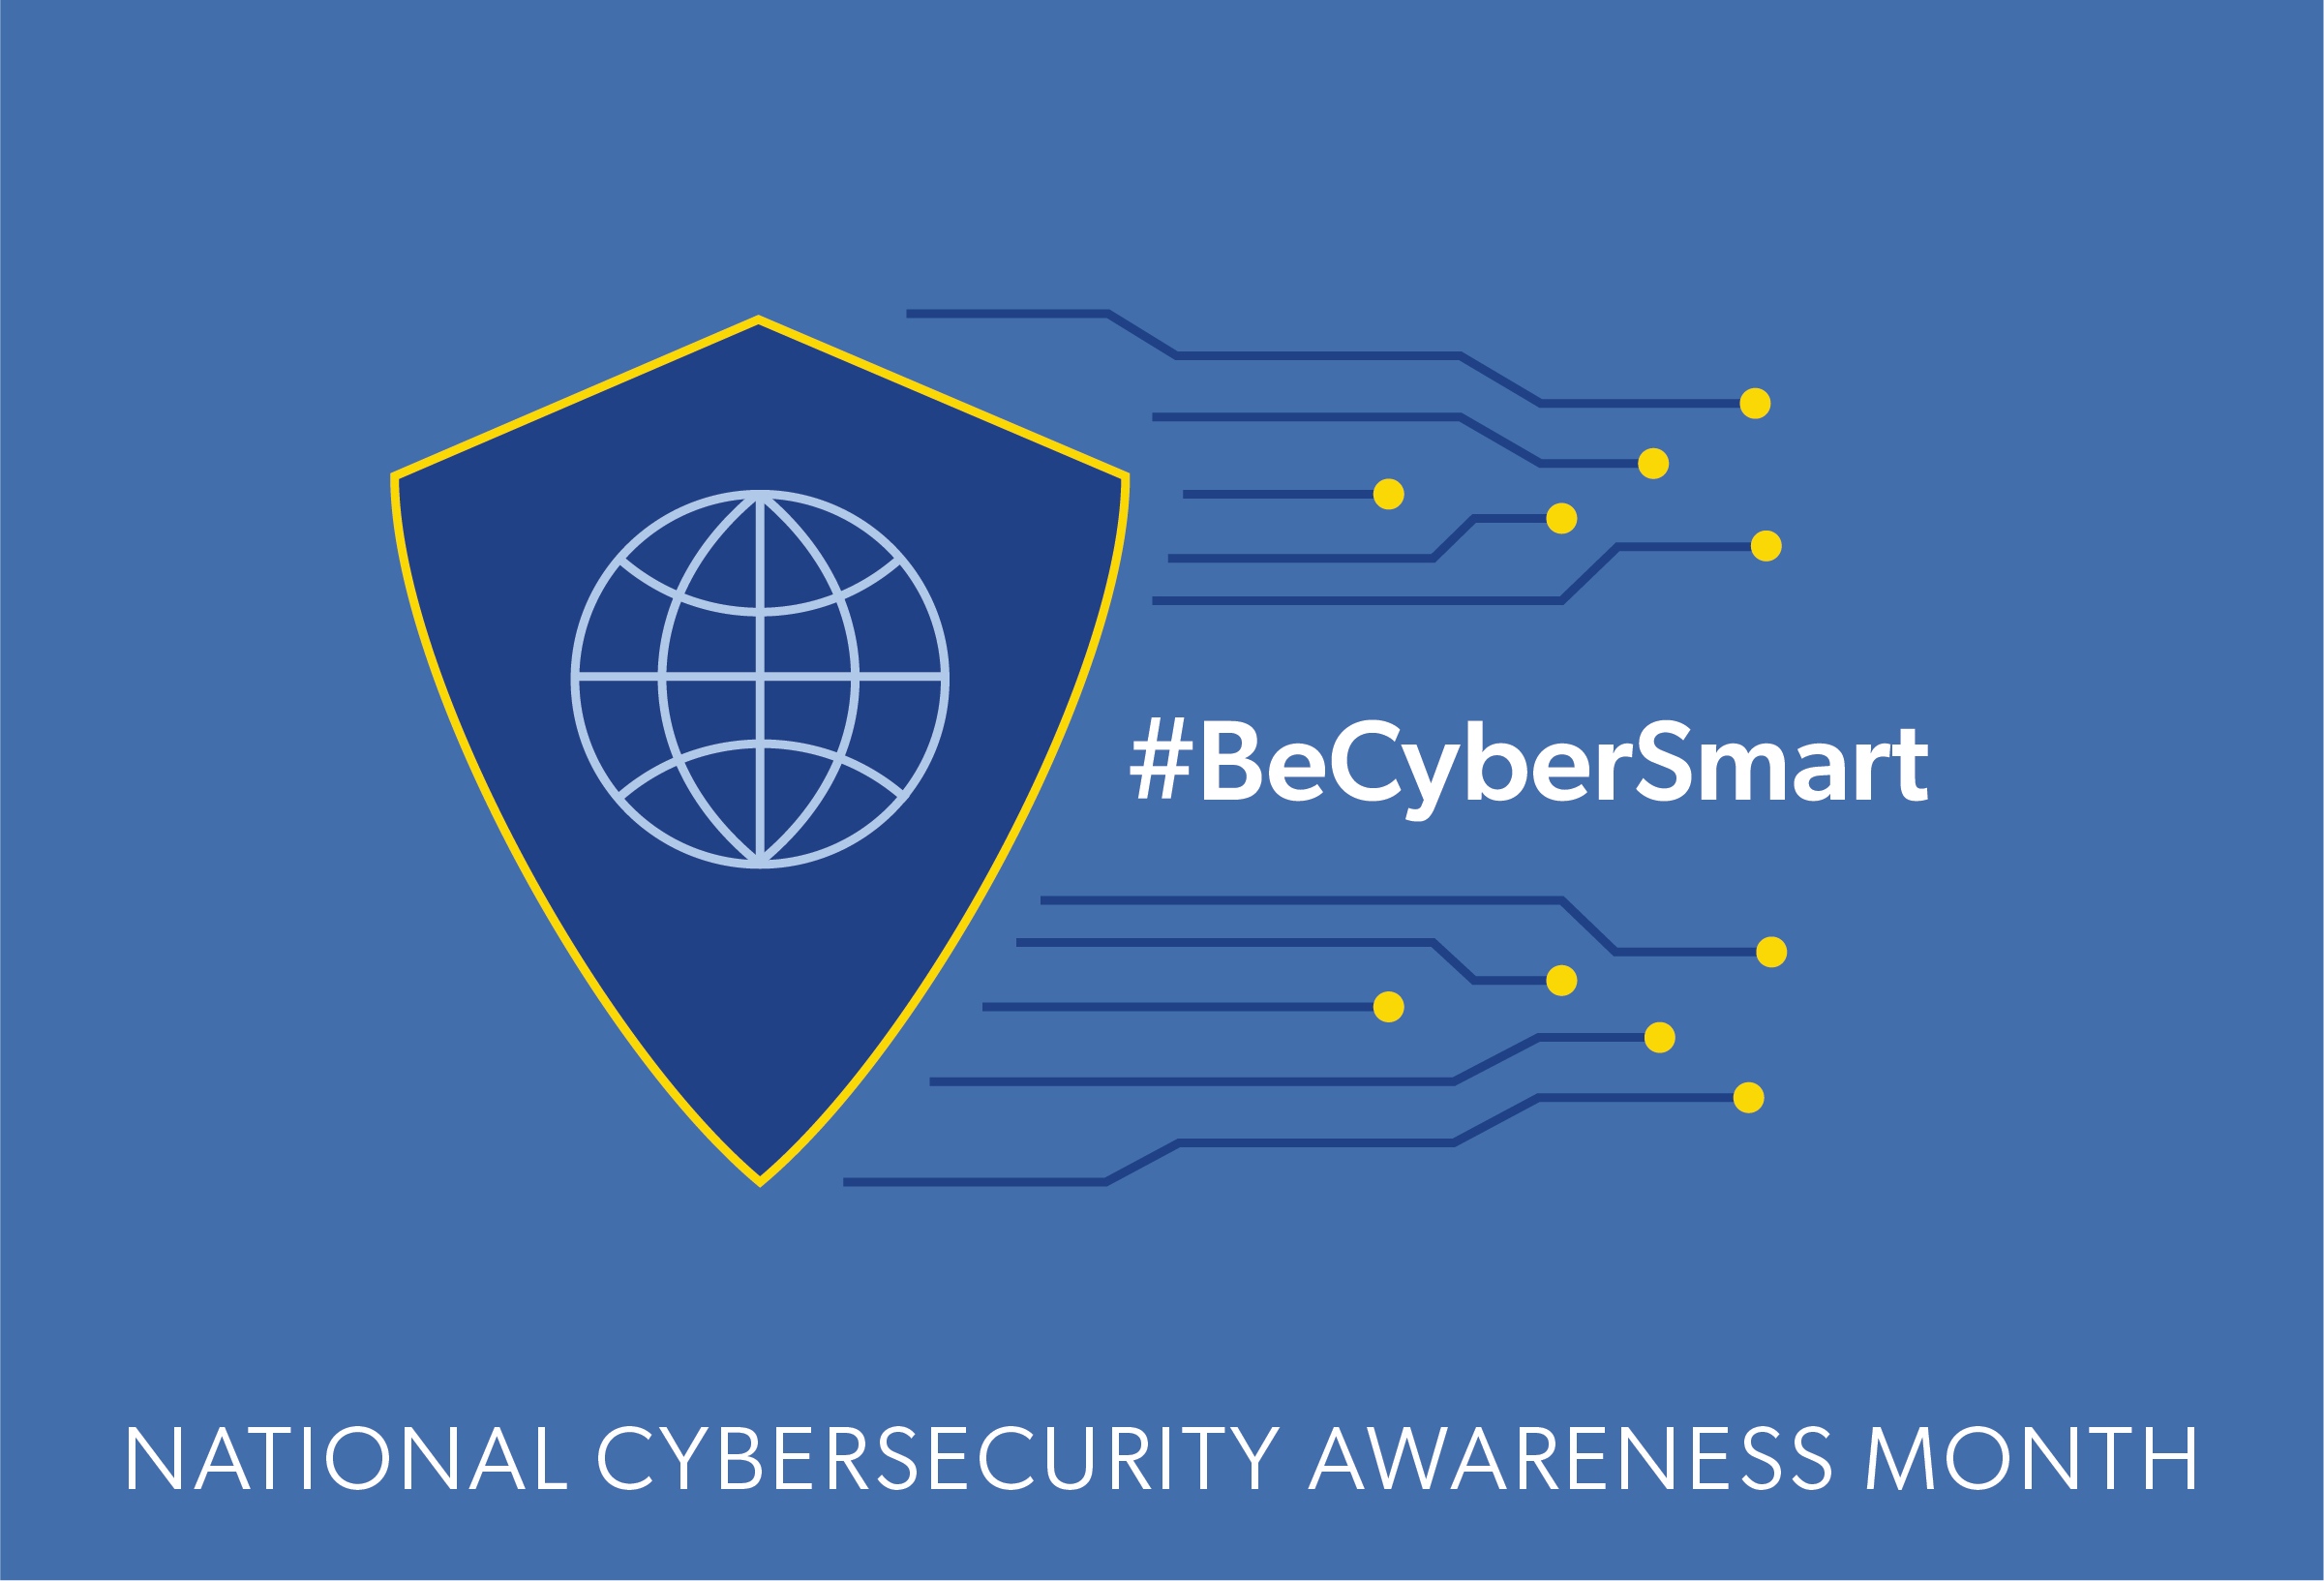 It’s Cybersecurity Awareness Month. Here’s what that means.